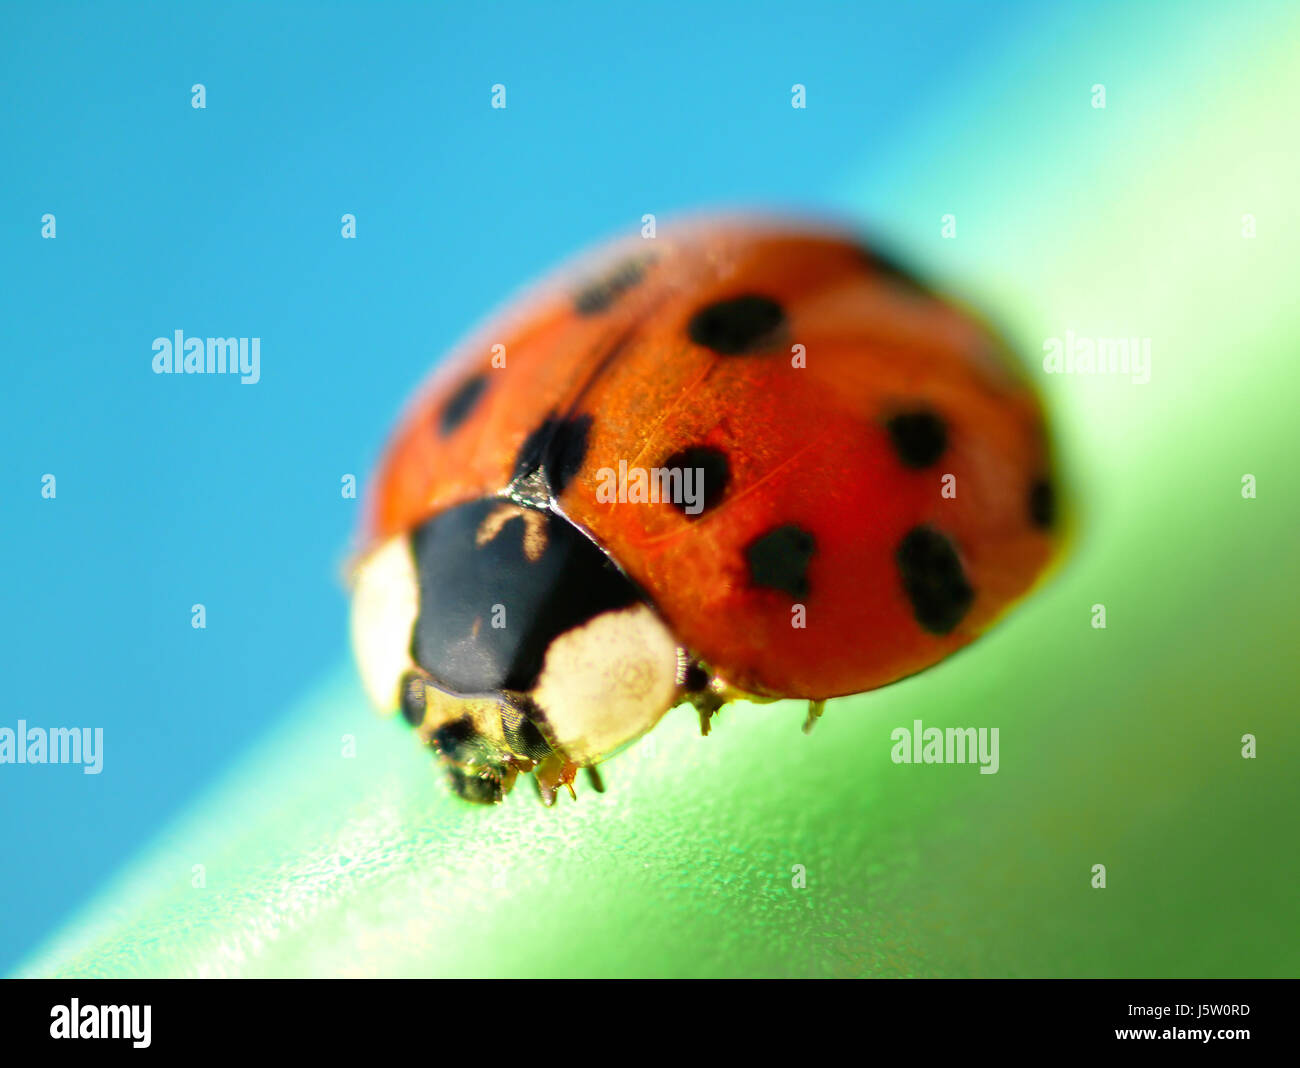 beetle ladybug blue macro close-up macro admission close up view insect green Stock Photo